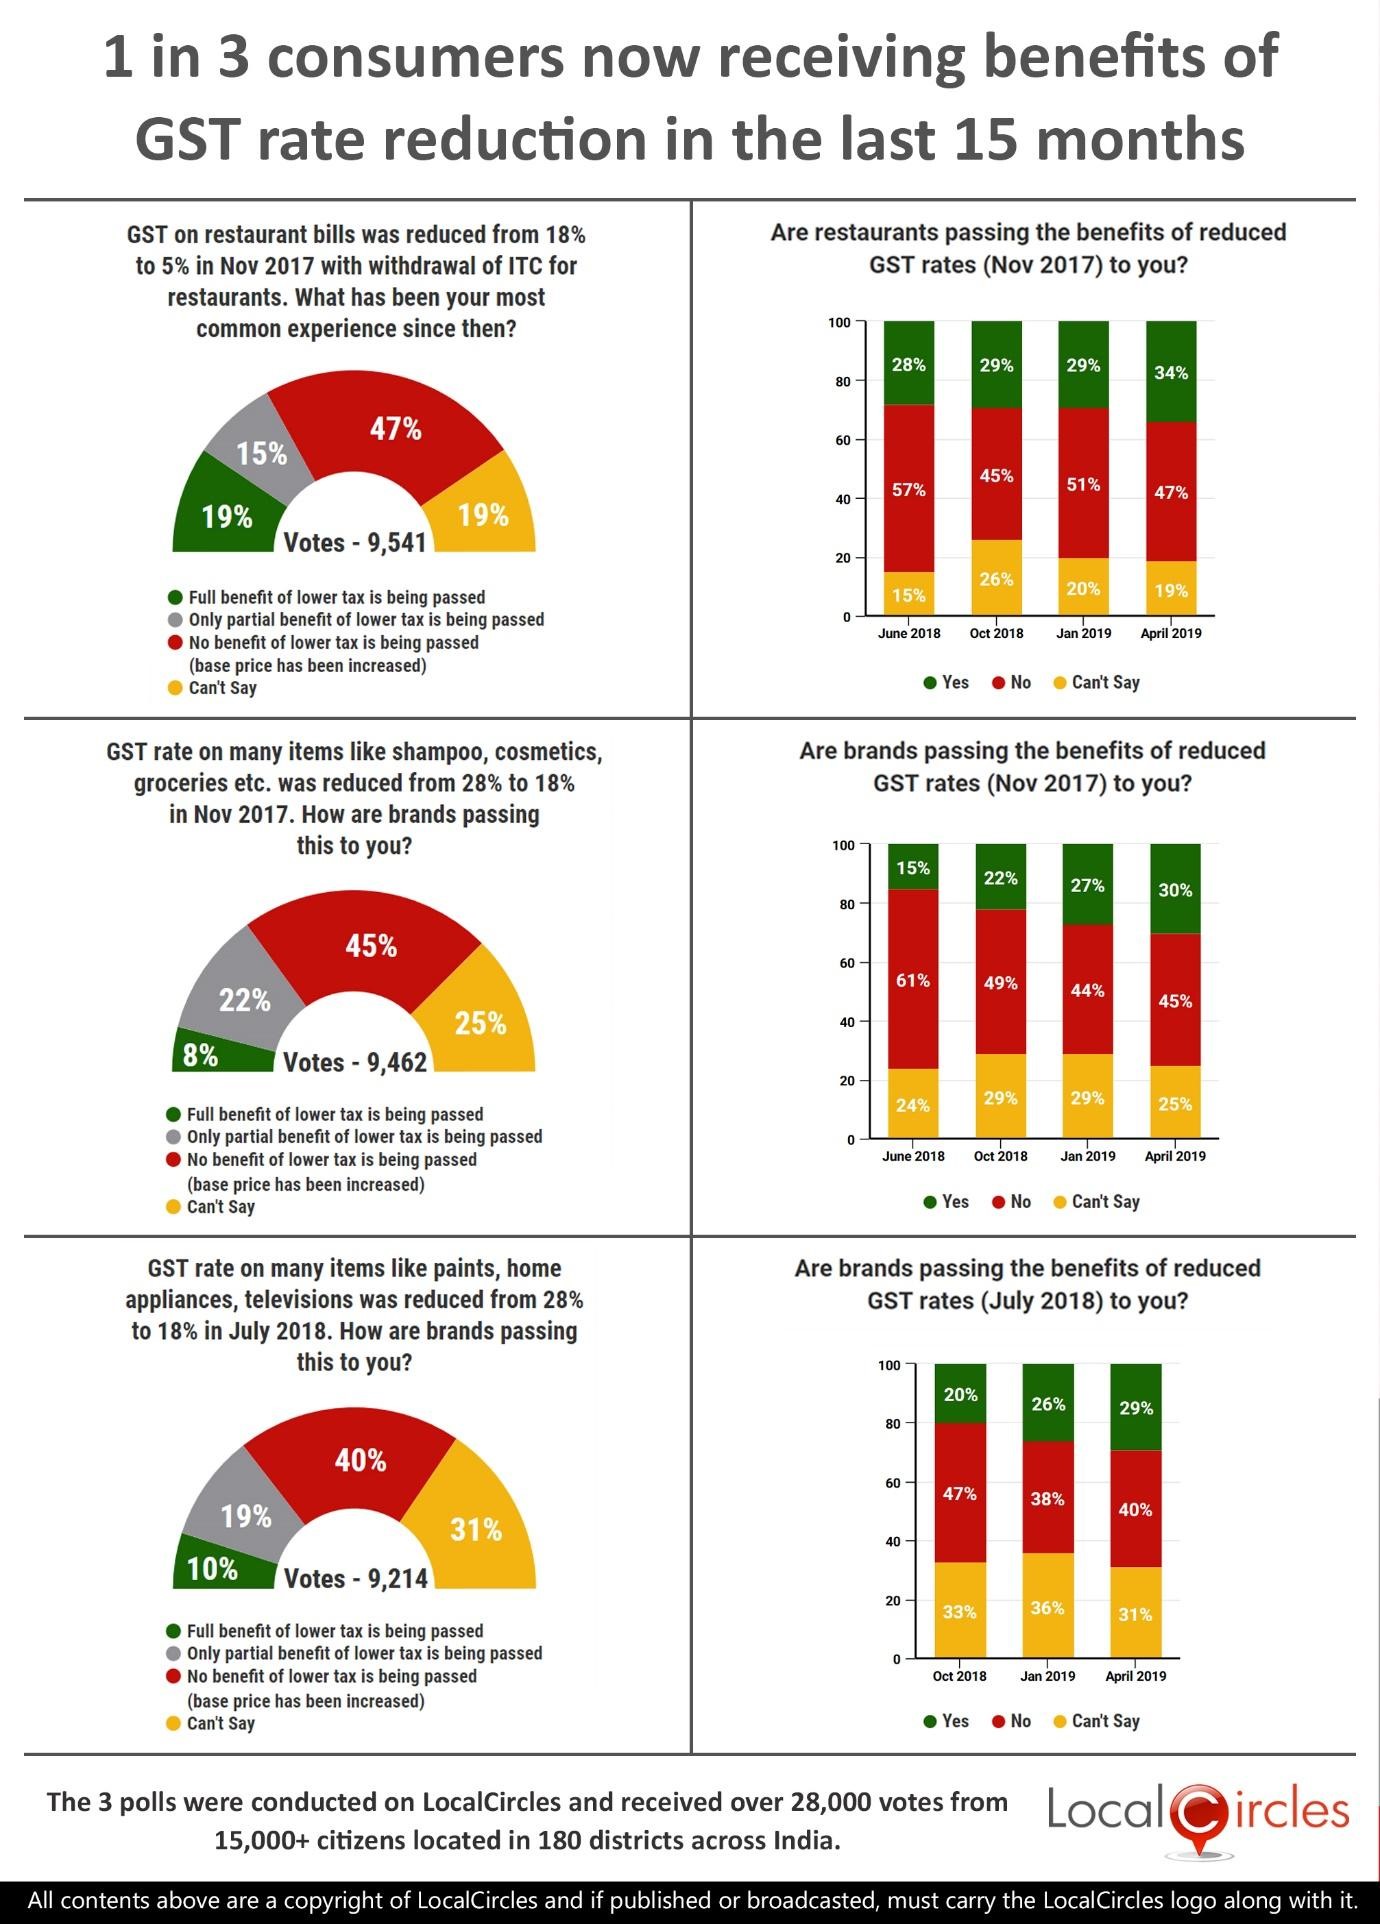 Poll Summary graphics showing that 1 in 3 consumers now receiving benefits of GST rate reduction in the last 15 months